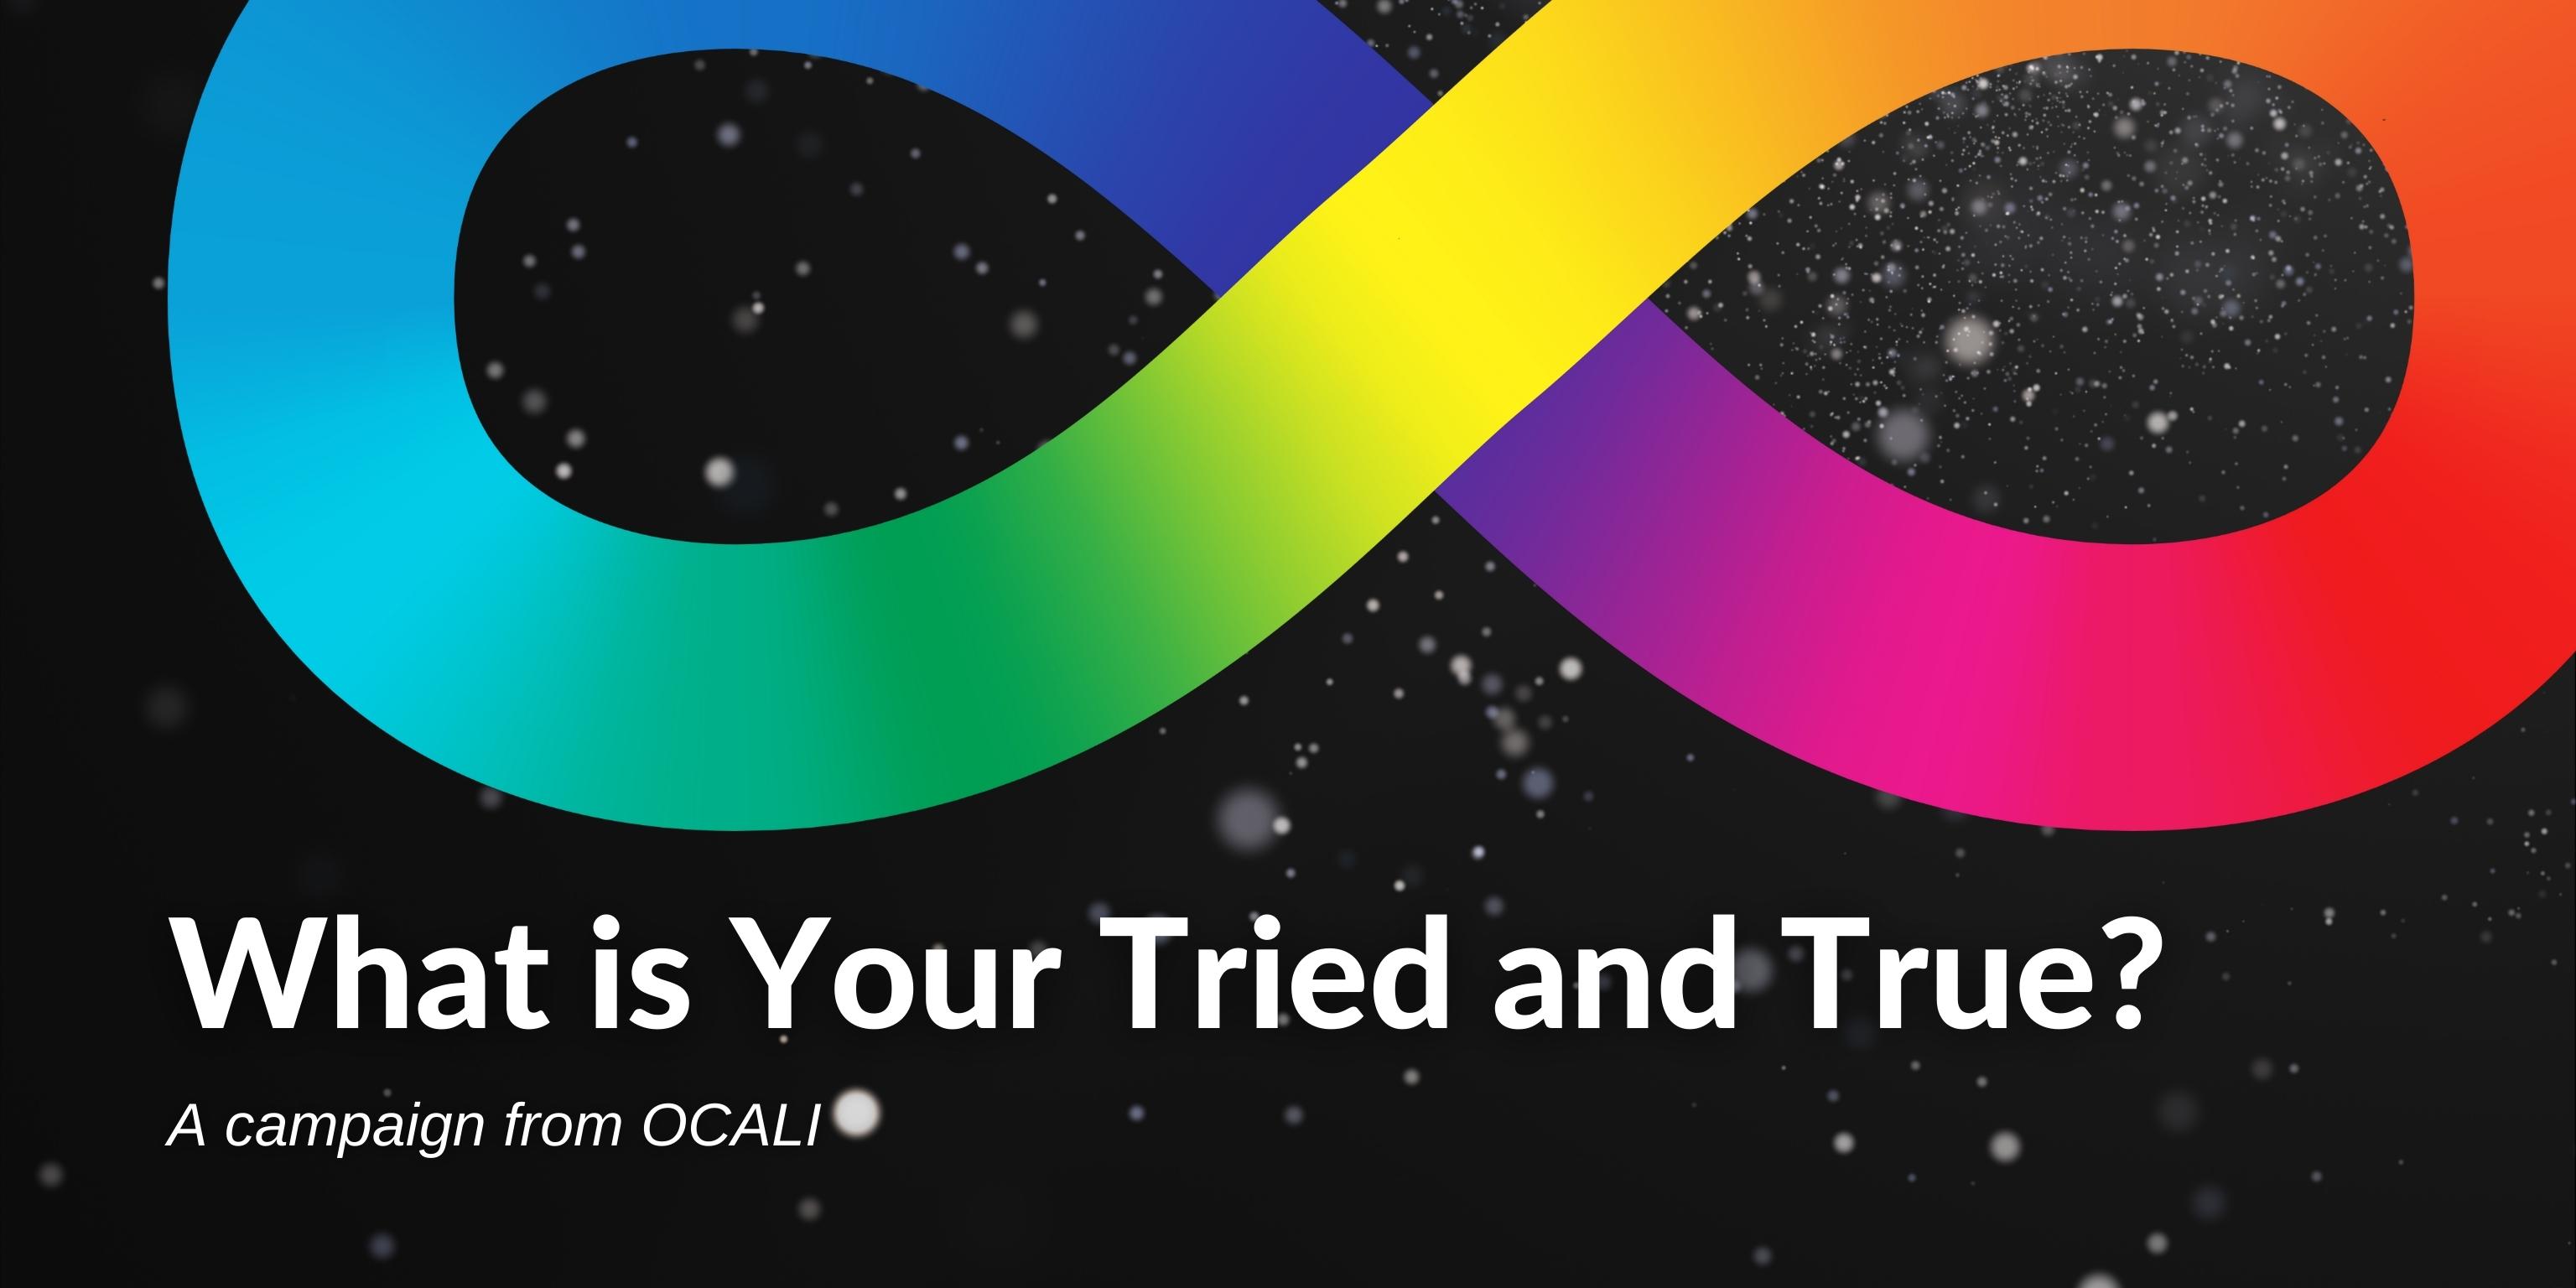 Black background, multicolored infinity sign. "What is Your Tried and True? A campaign from OCALI.